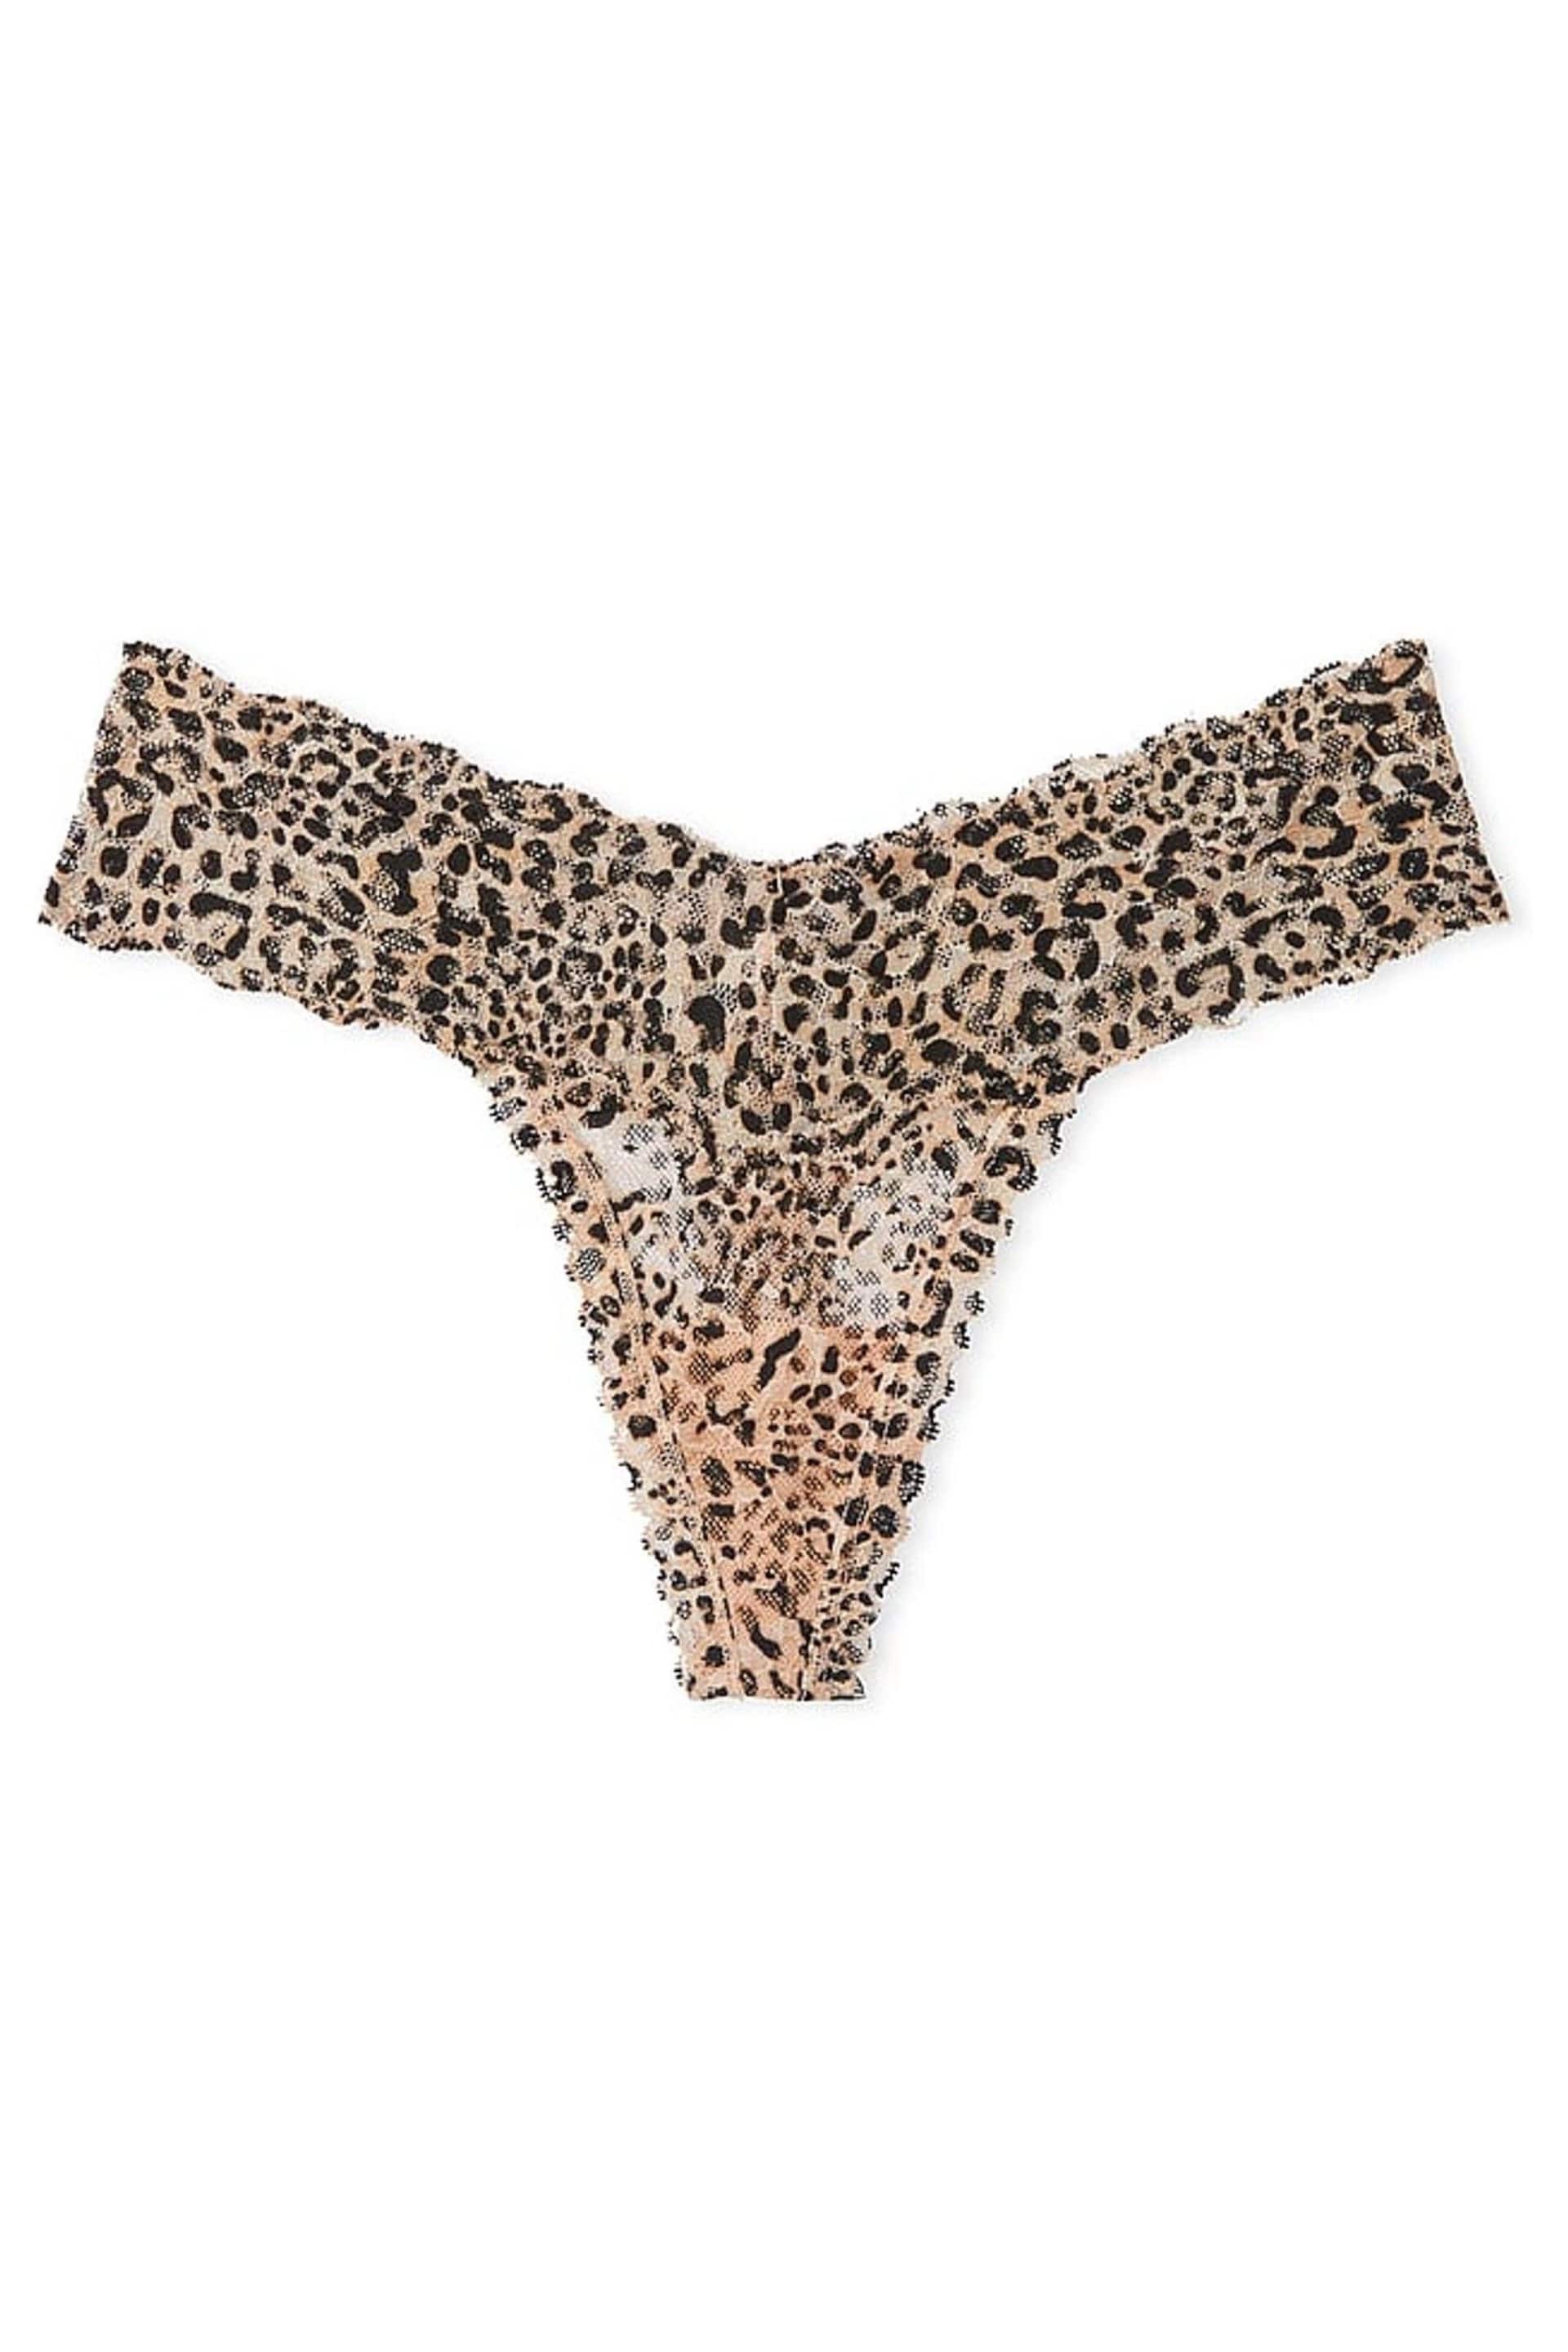 Victoria's Secret Champagne Nude Basic Animal Thong Lace Knickers - Image 3 of 3